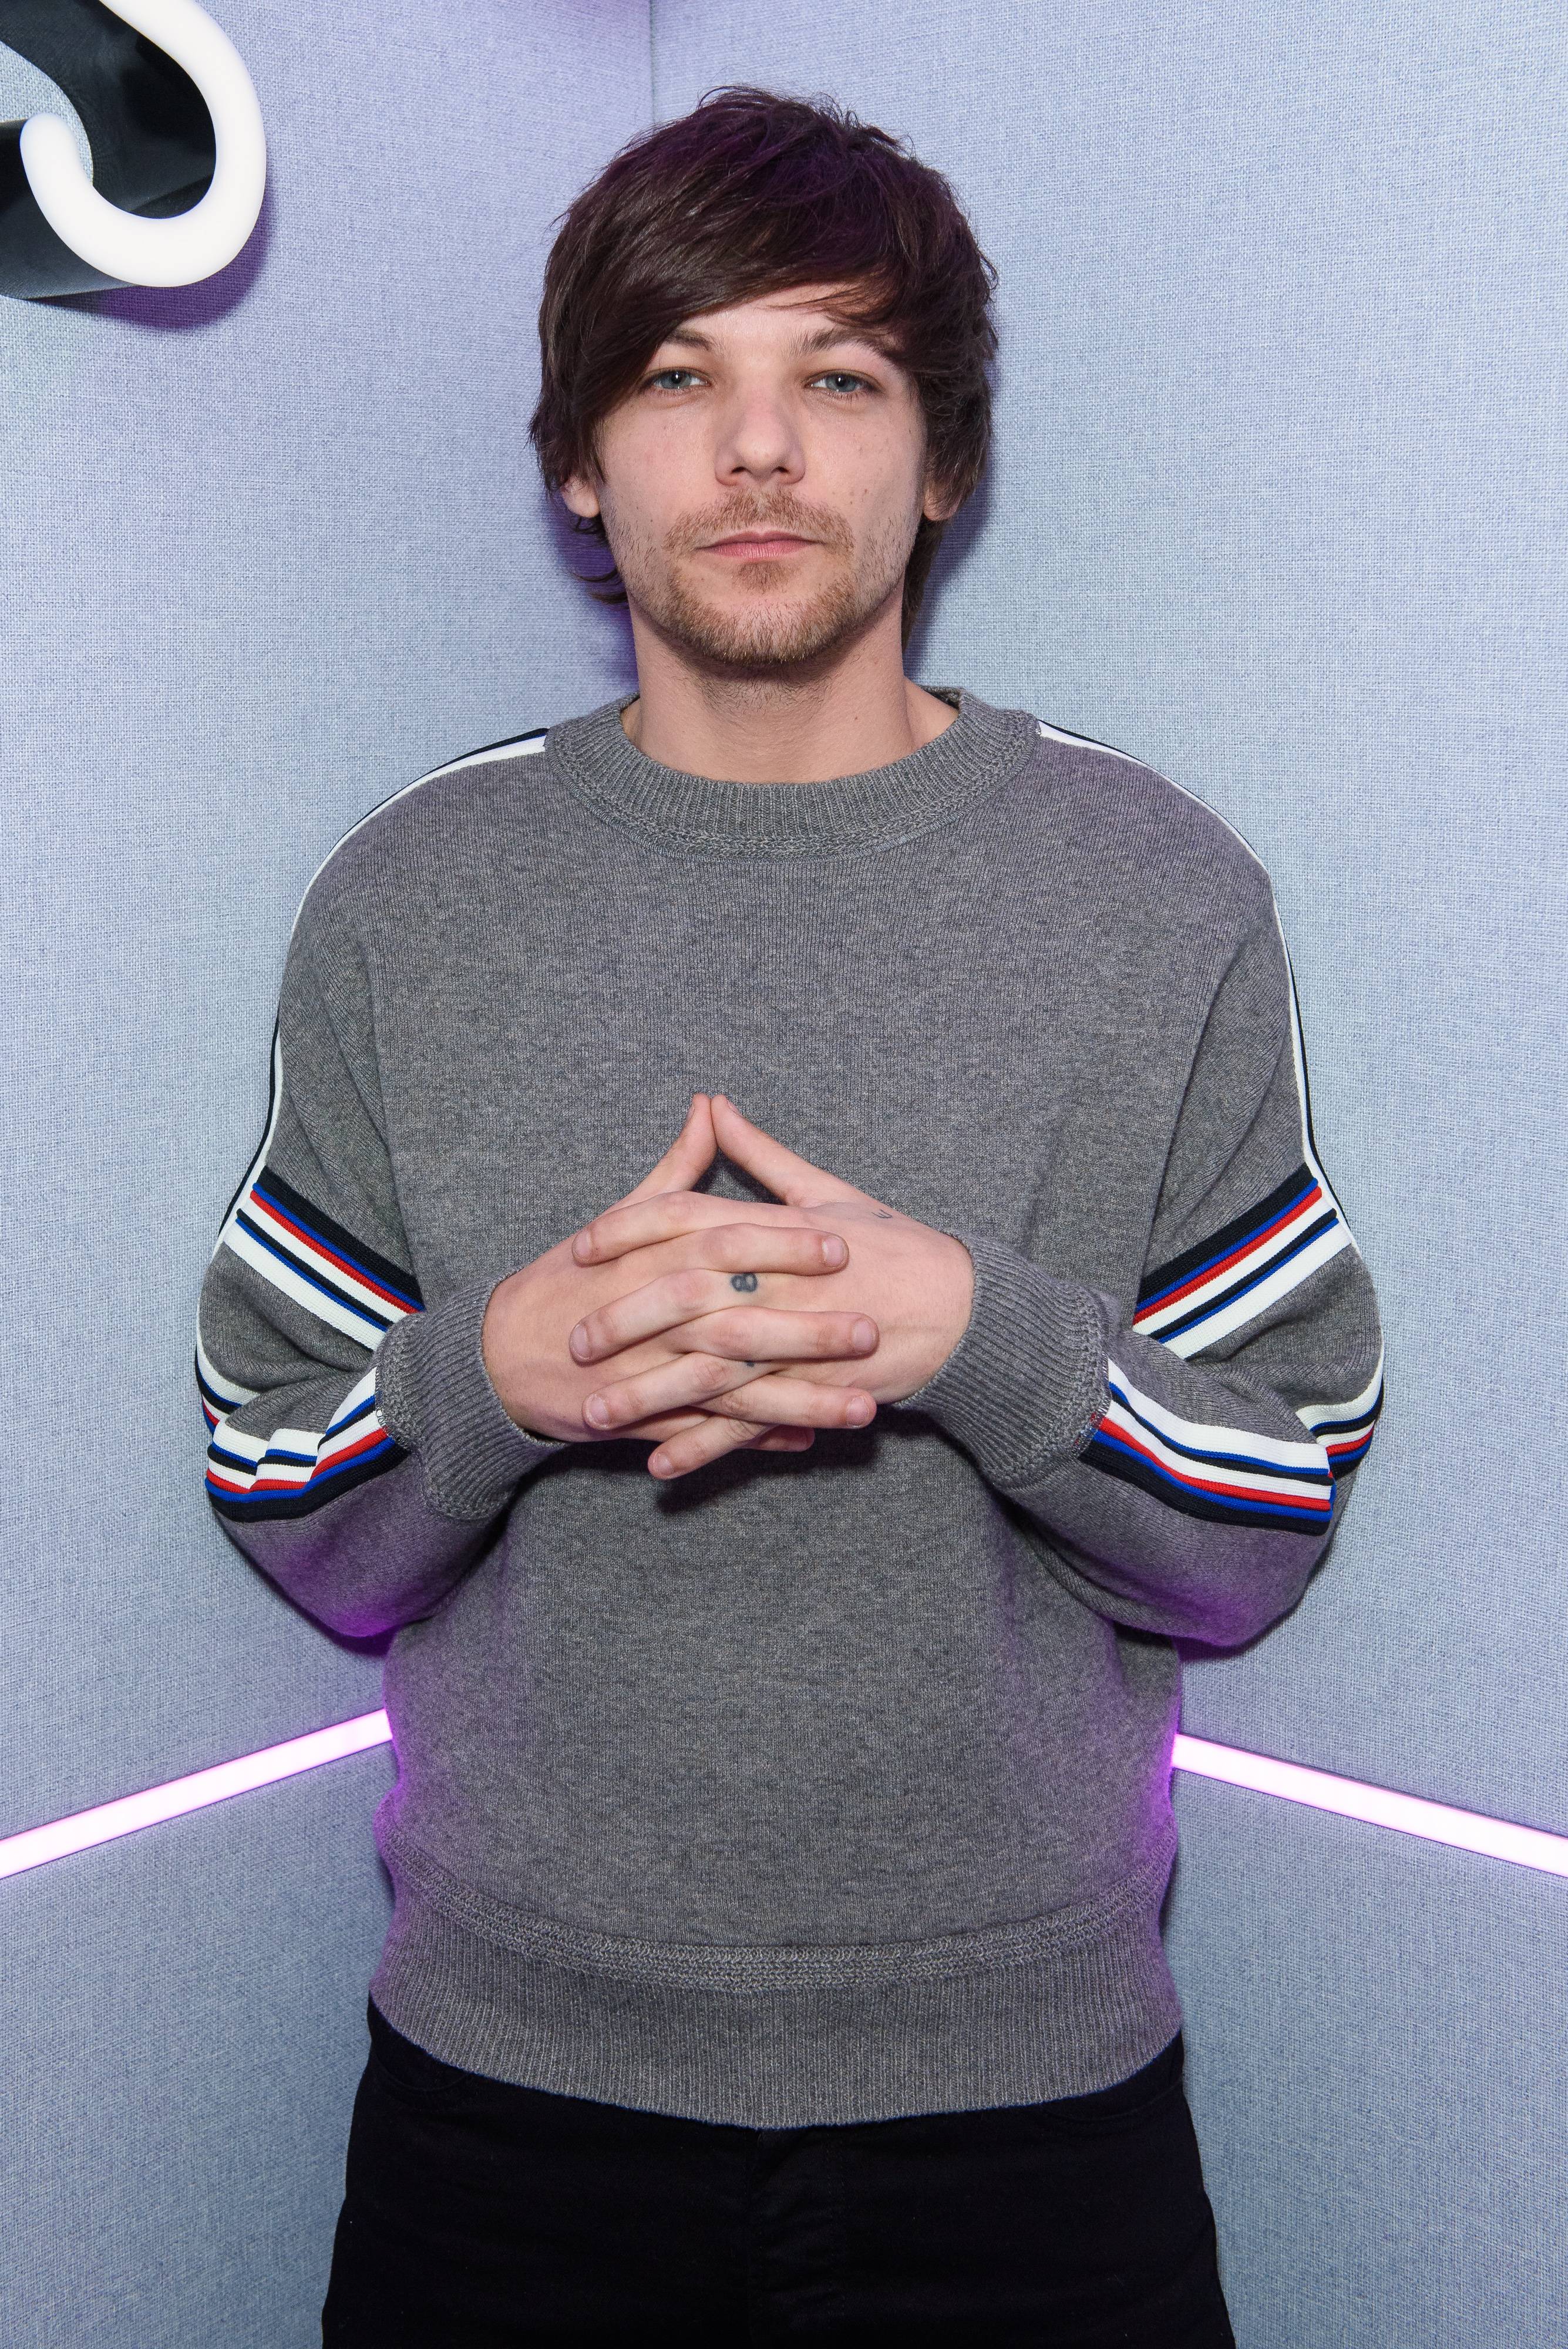 Louis Tomlinson's 'Two of Us' Is About the Death of His Mom